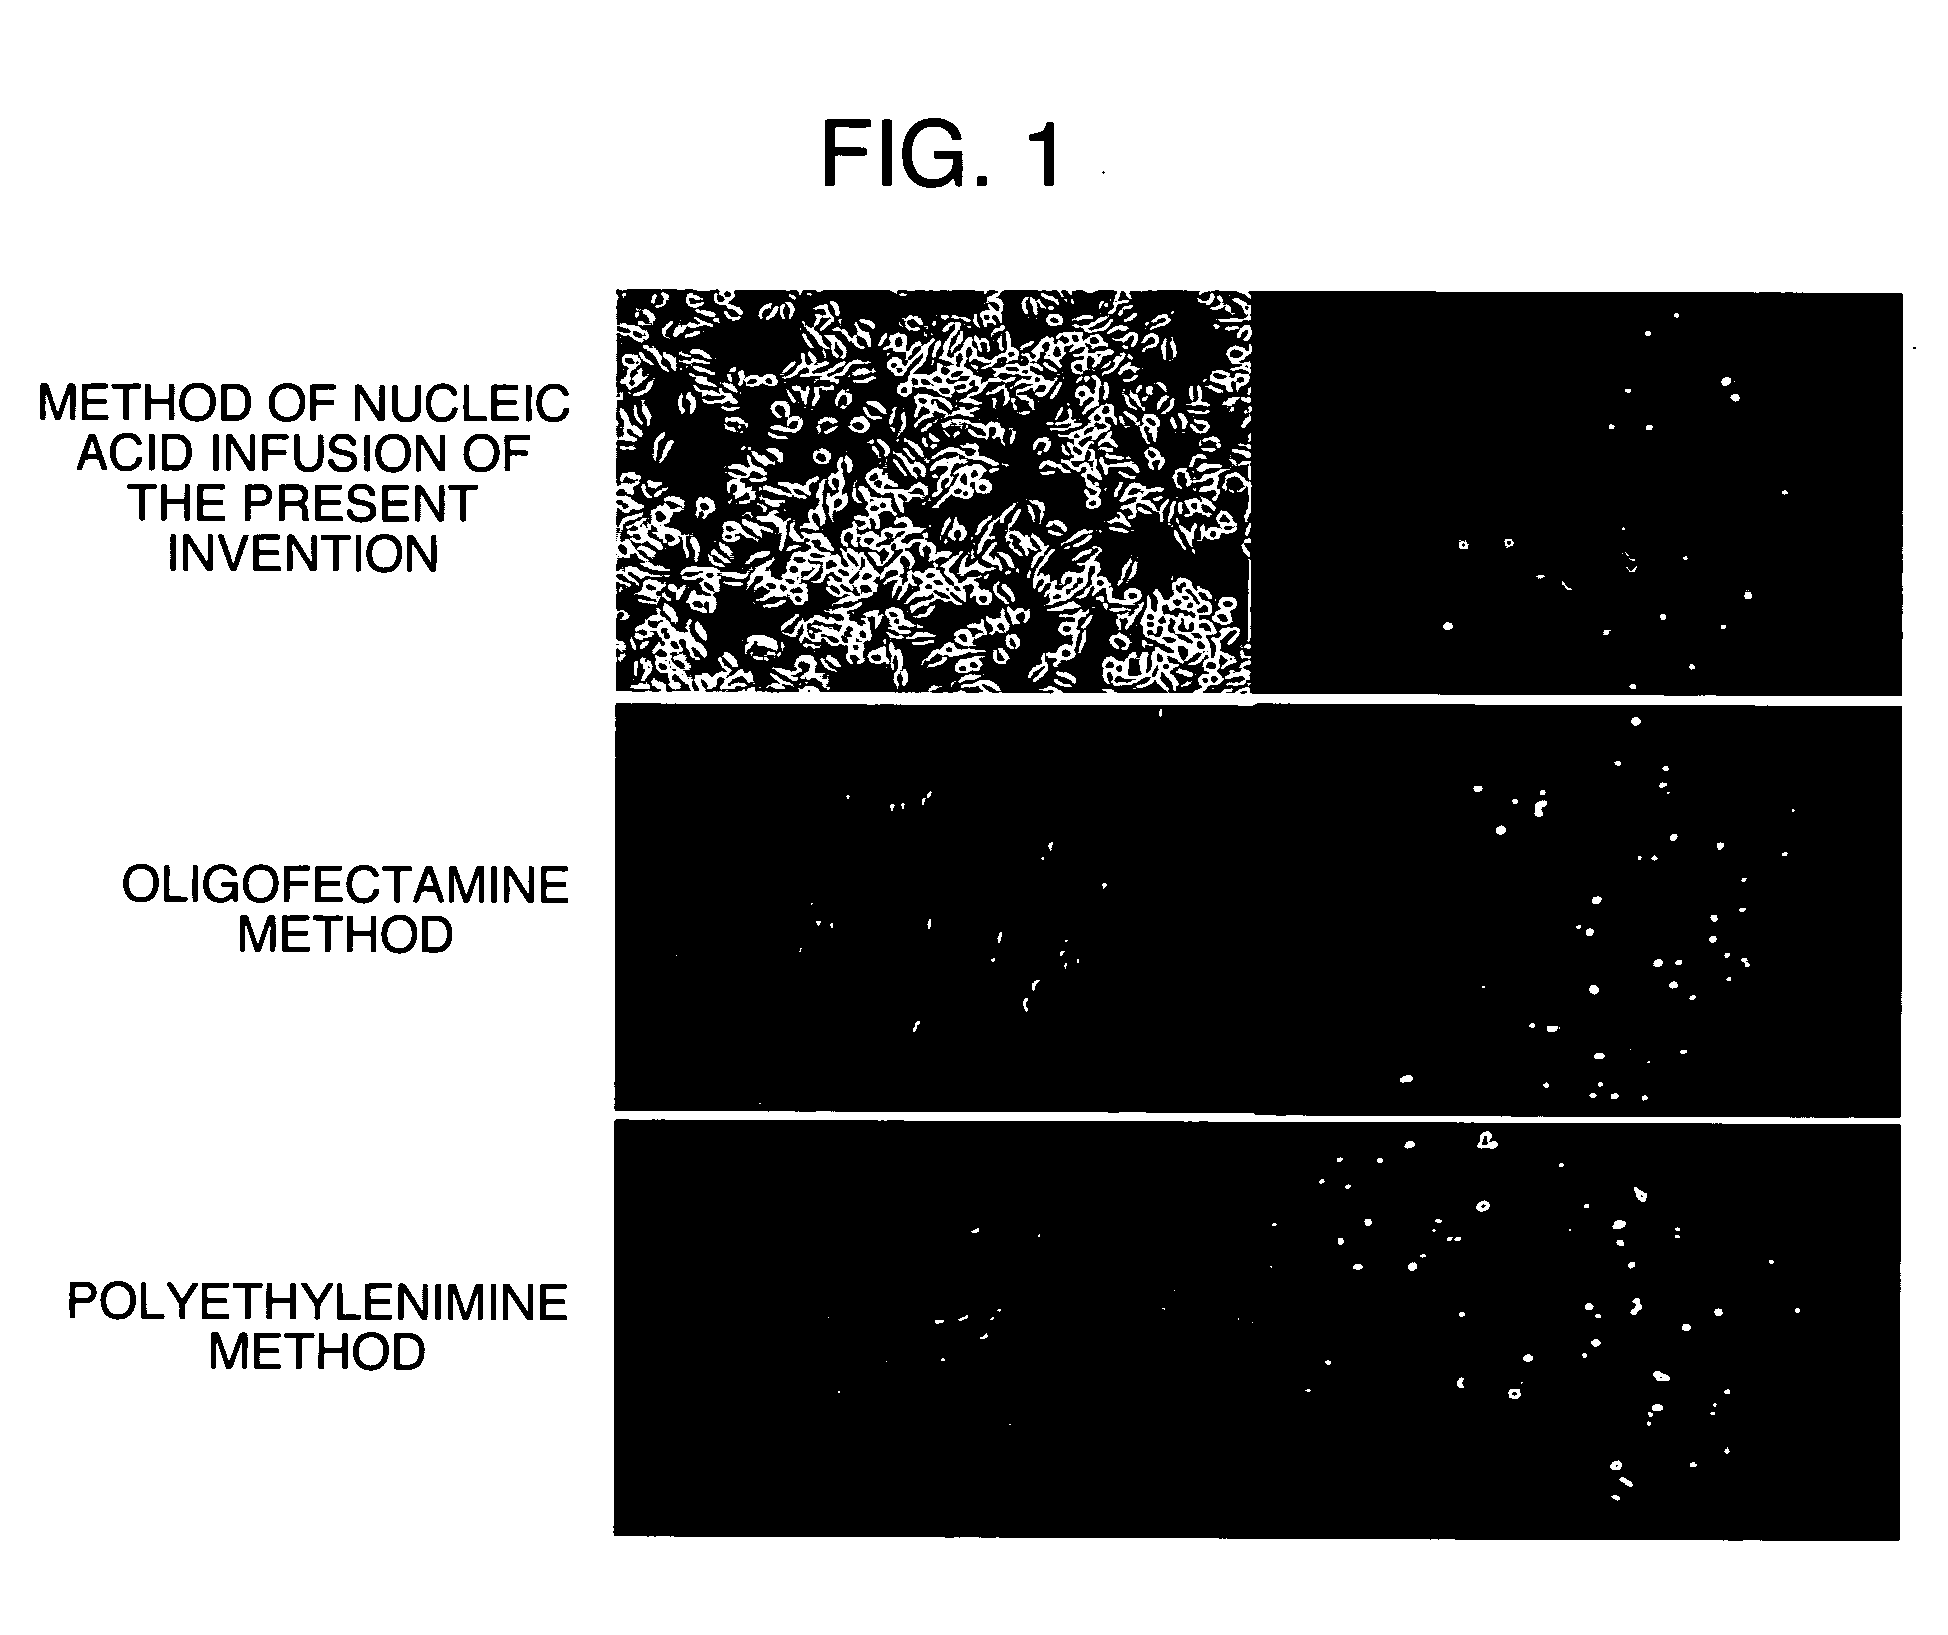 Method of nucleic acid infusion